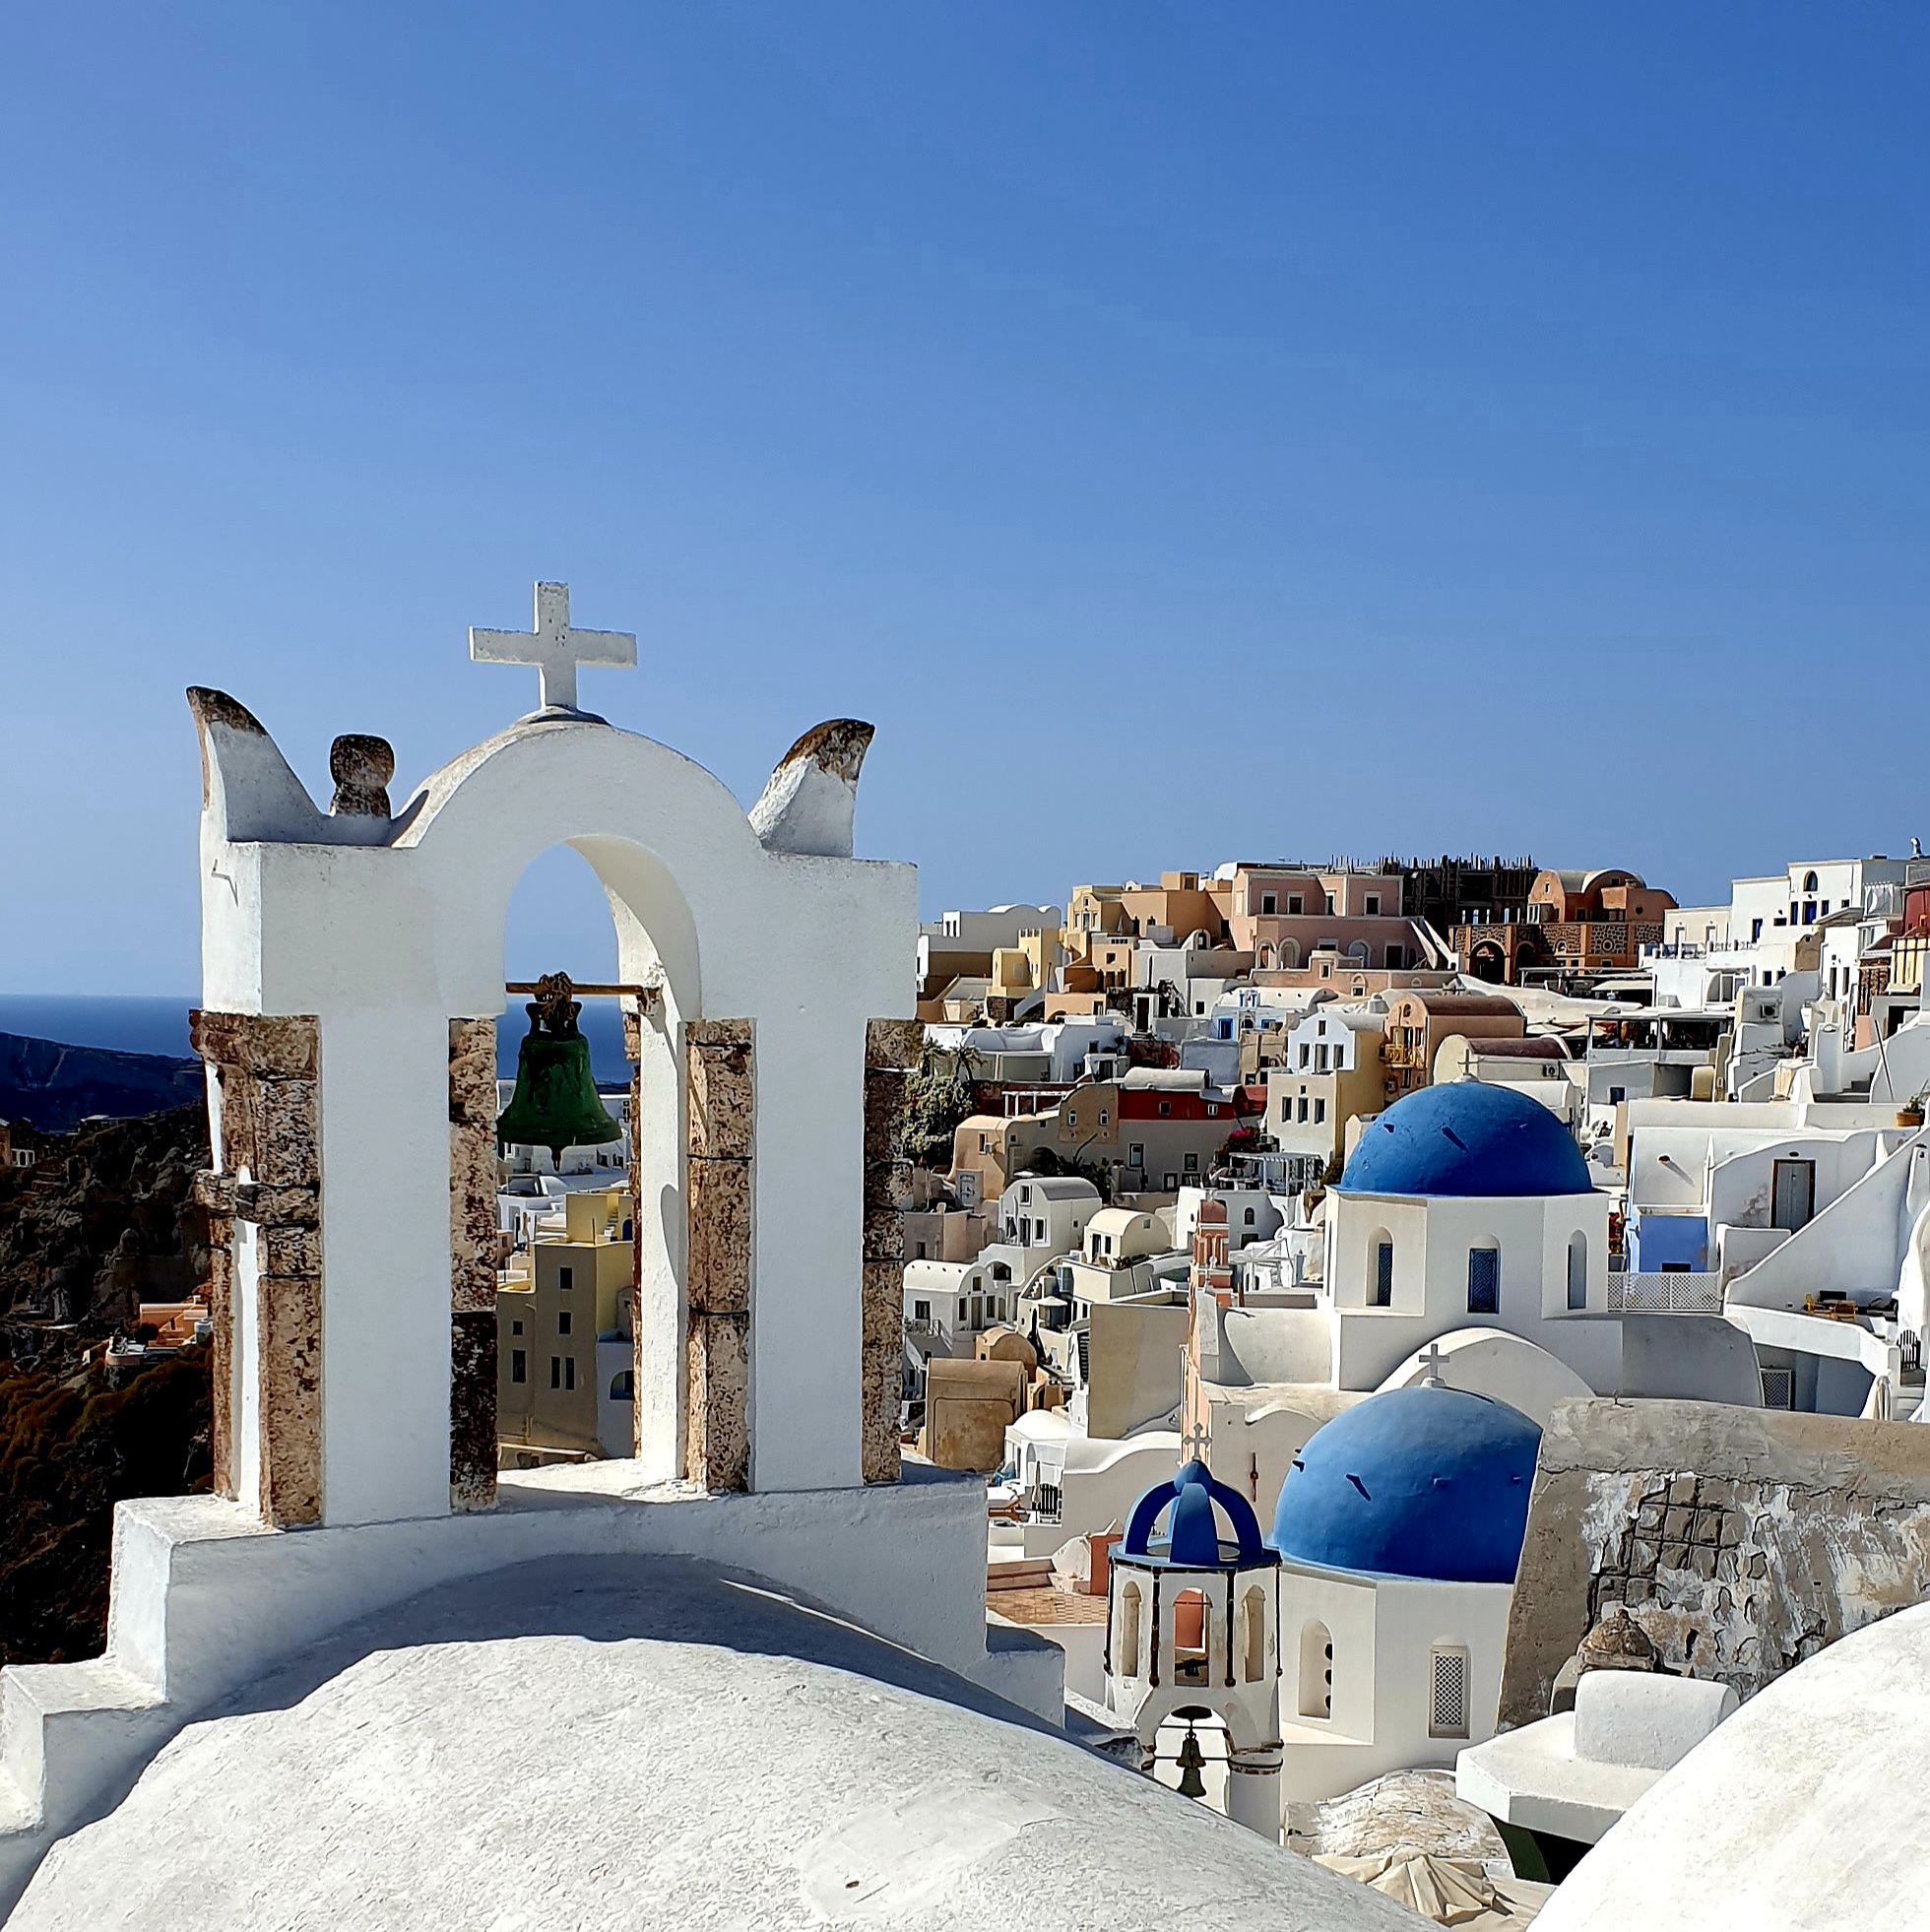 Oia village in Santorini, Greece: A guide on what to see & the top things to do